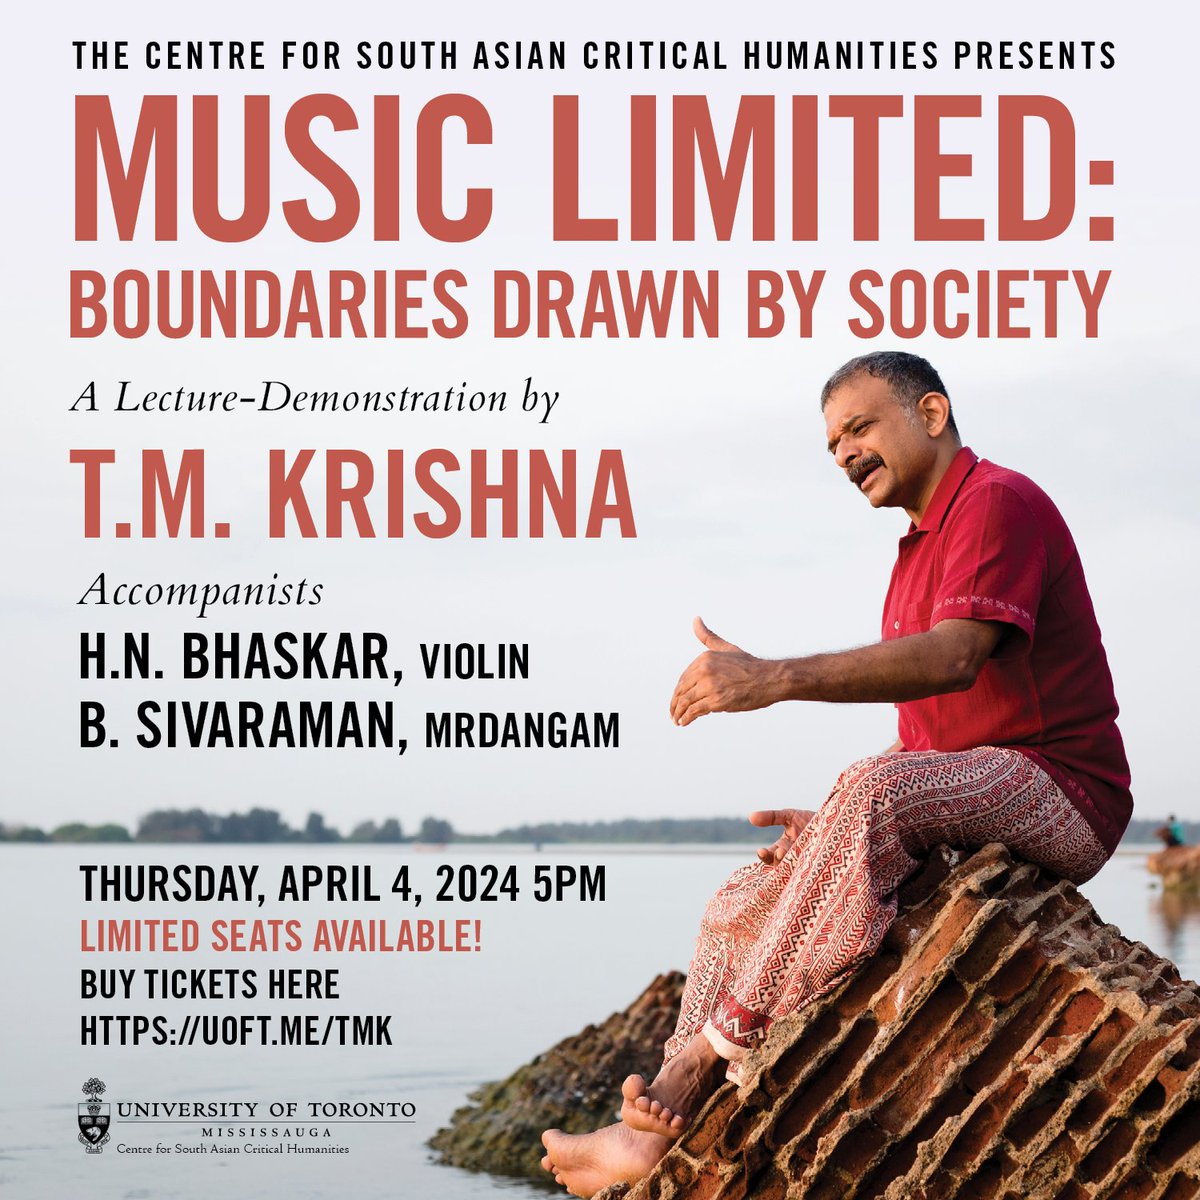 EVENT |✨ Music Limited: Boundaries by Society. A Lecture-Demonstration by @tmkrishna Thursday, April 4, 2024 5pm MiST Theatre @UTM Buy your tickets ➡️ uoft.me/TMK Listen to Carnatic vocalist, writer, activist, T.M. Krishna speak and sing at this special event.